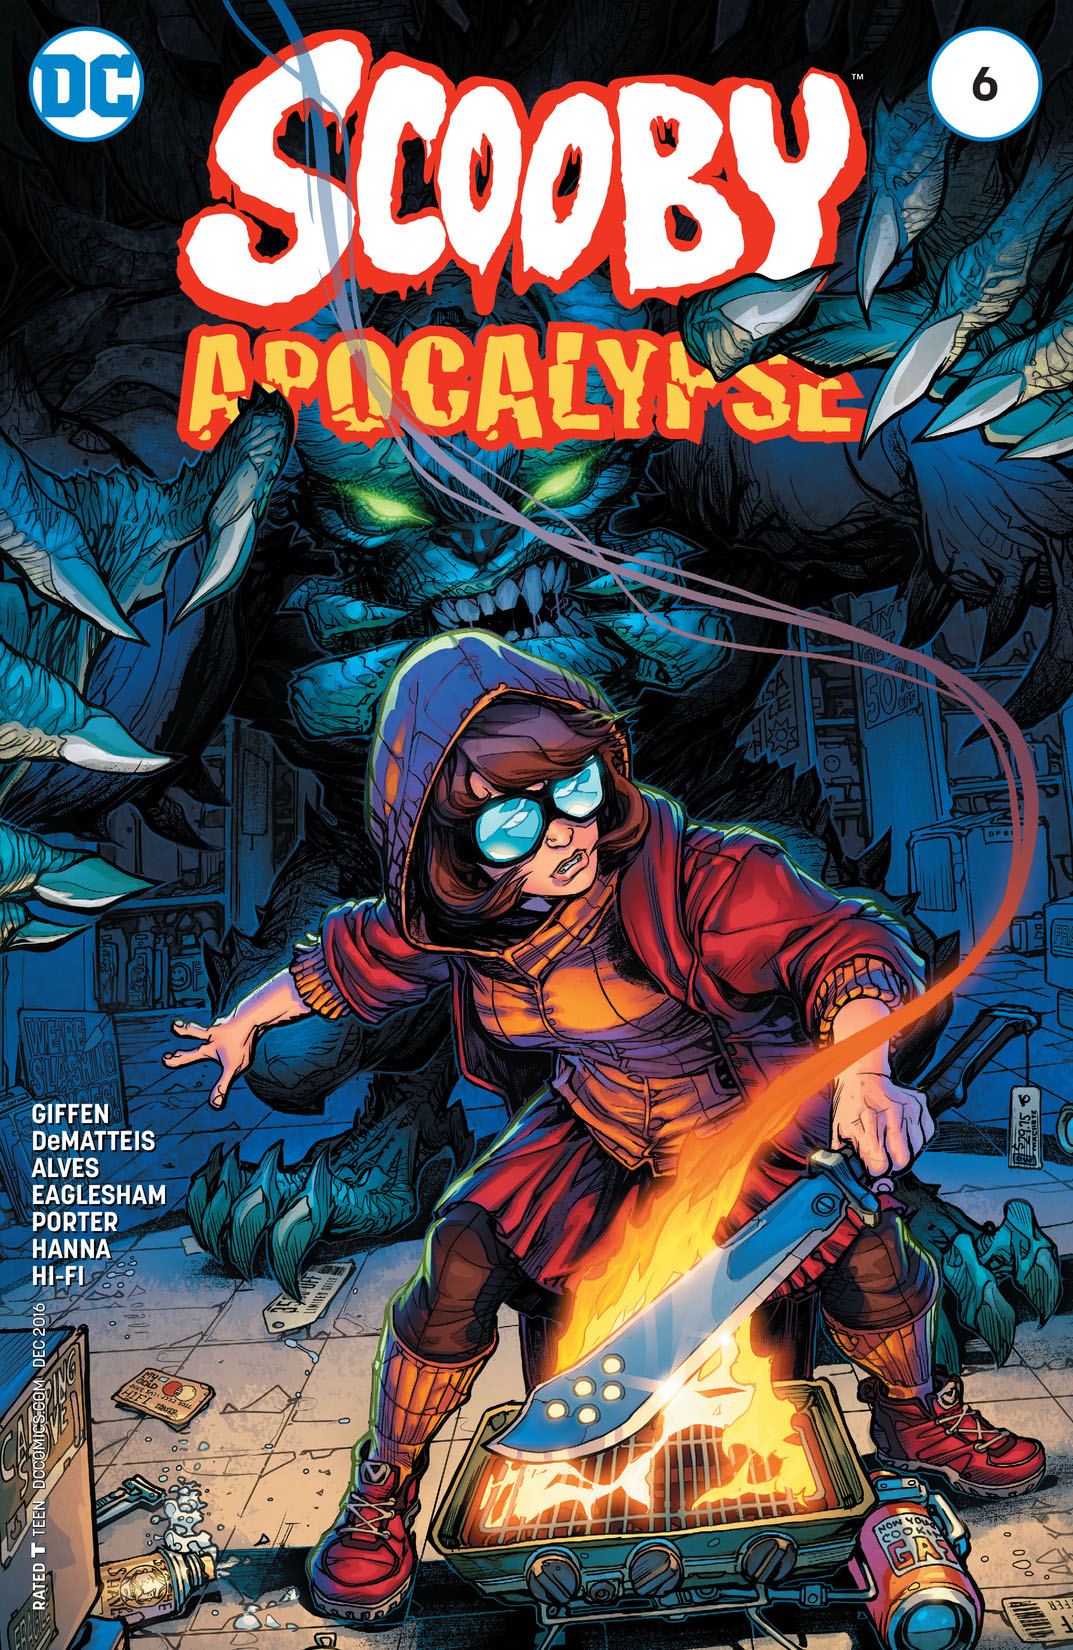 Scooby Apocalypse #6 preview images